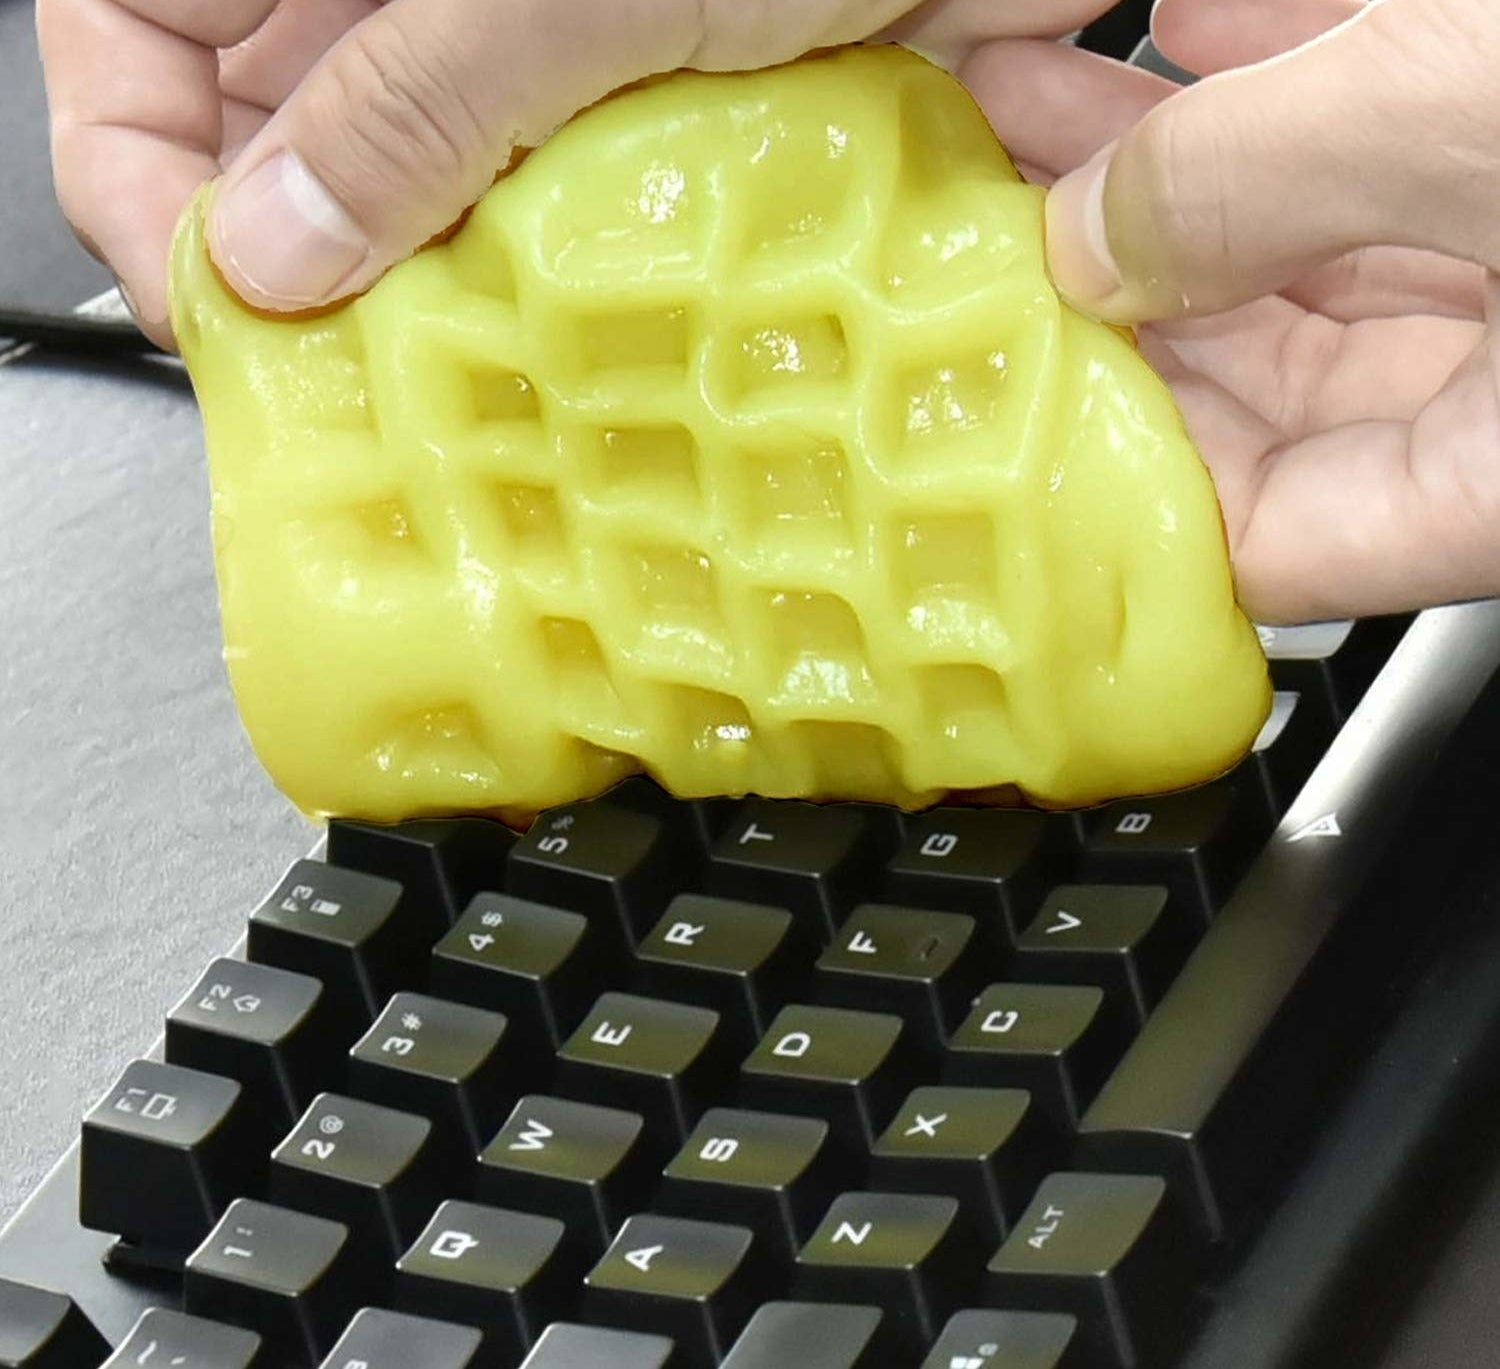 A person using gel cleaning putty to clean a computer keyboard